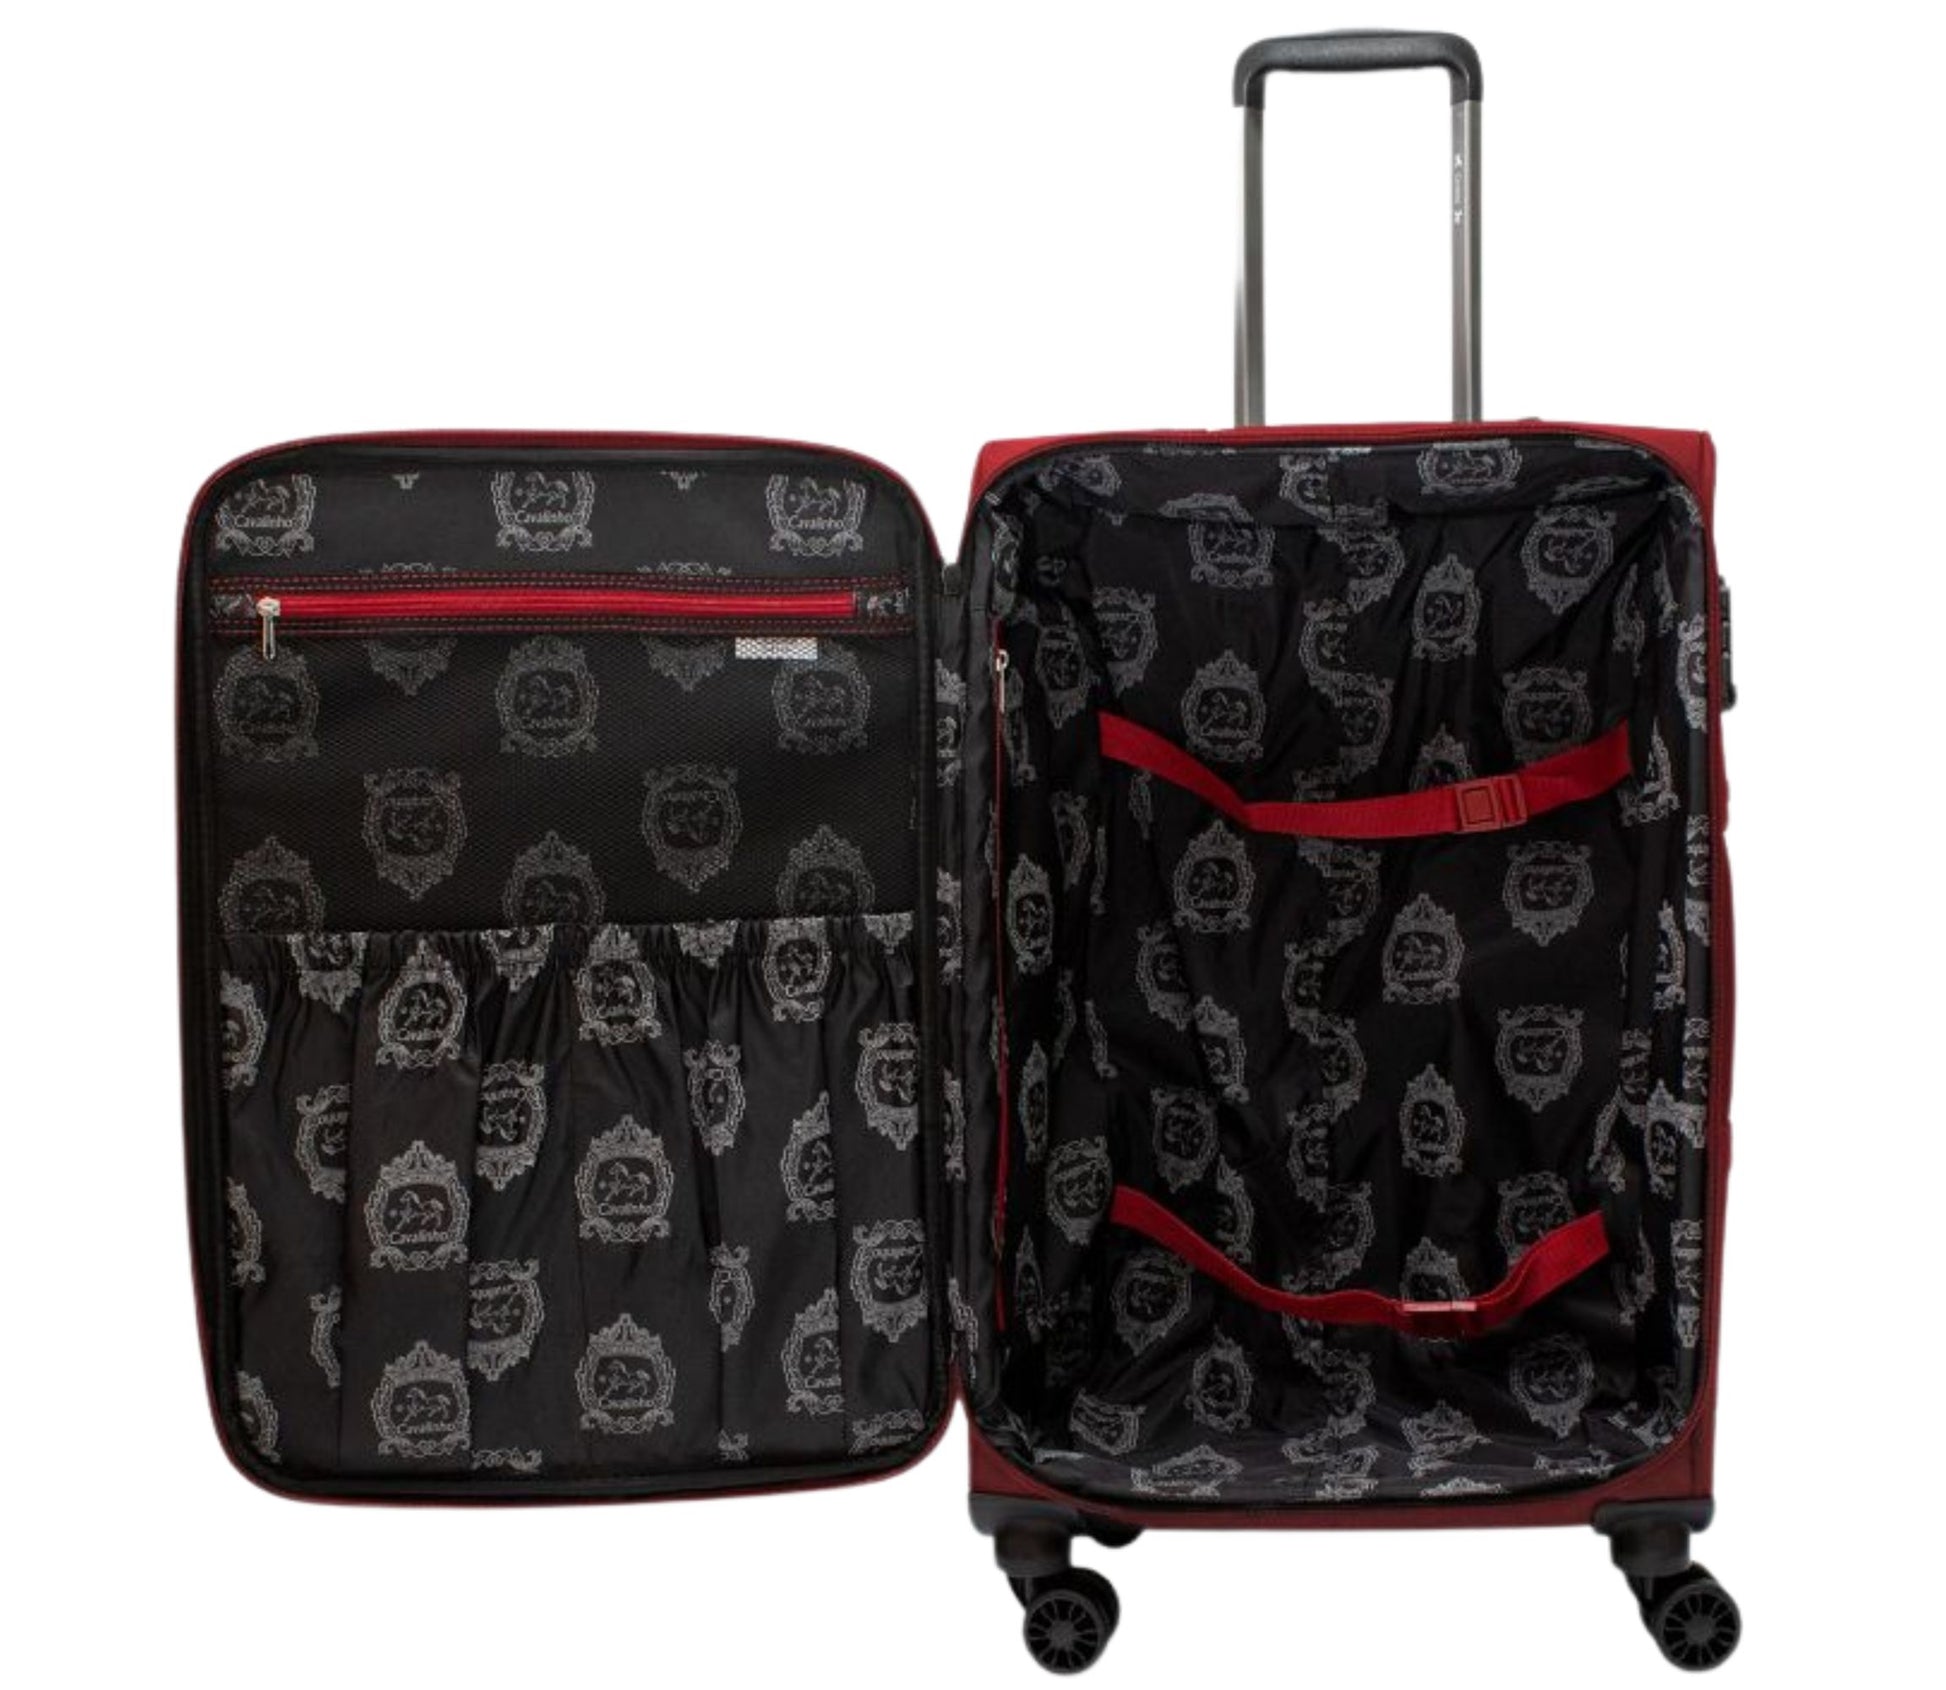 Cavalinho Check-in Softside Luggage (24" or 28") - 24 inch Red - 68020003.04.24_P04